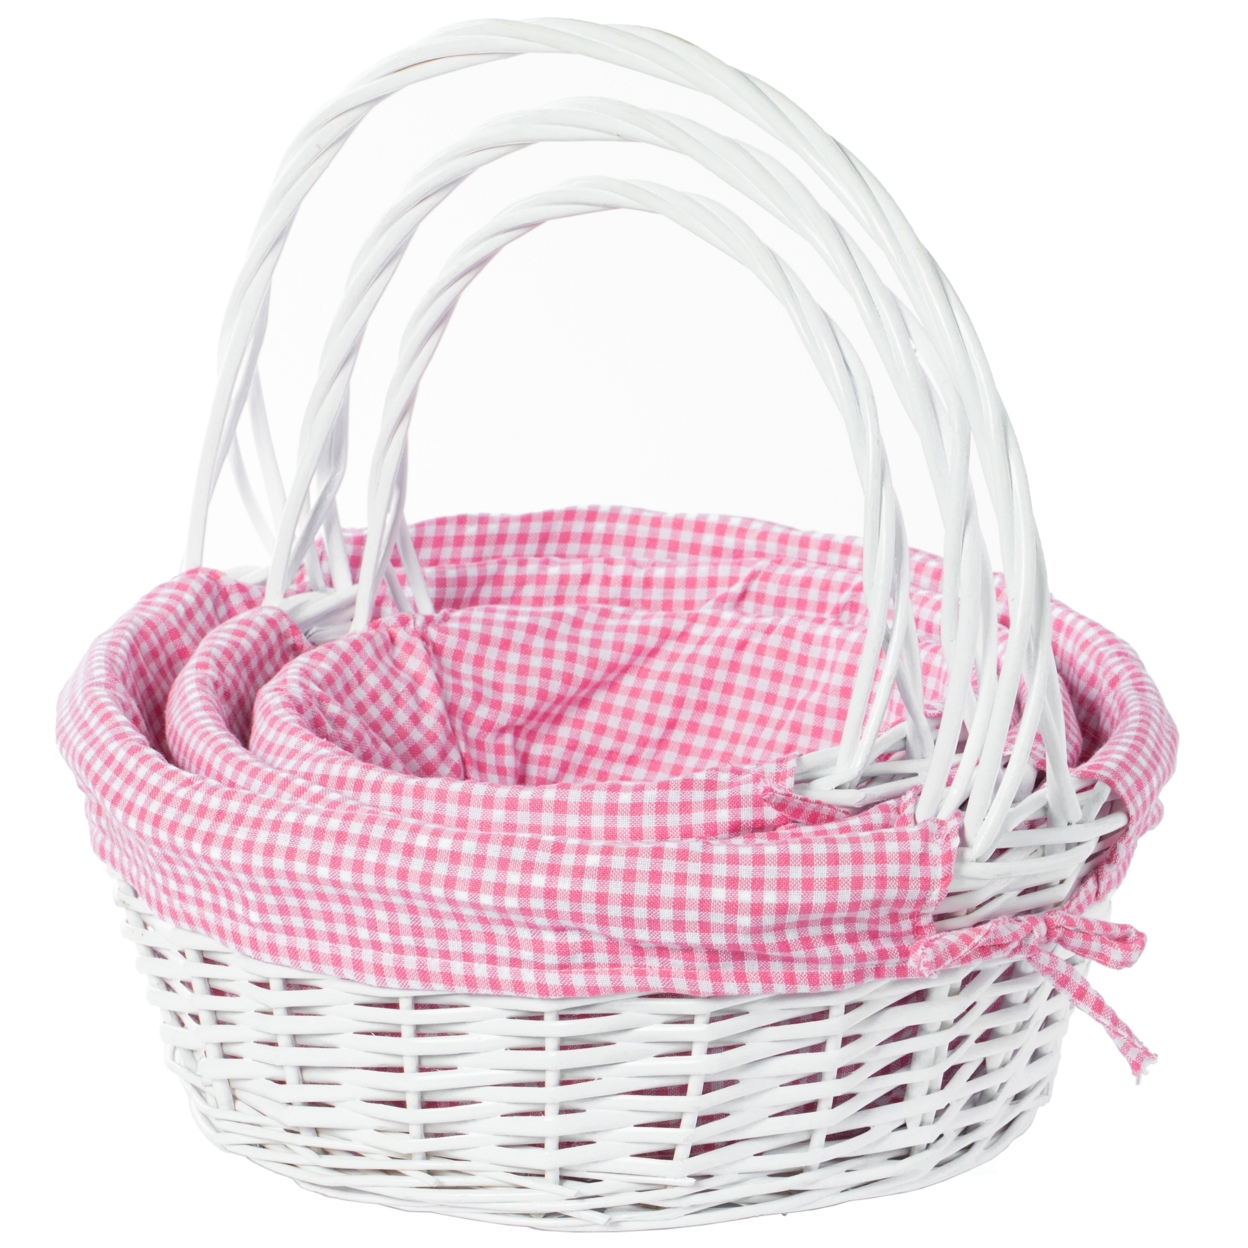 White Round Willow Gift Basket, With Blue And White Gingham Liner And Handles - Pink Set Of 3